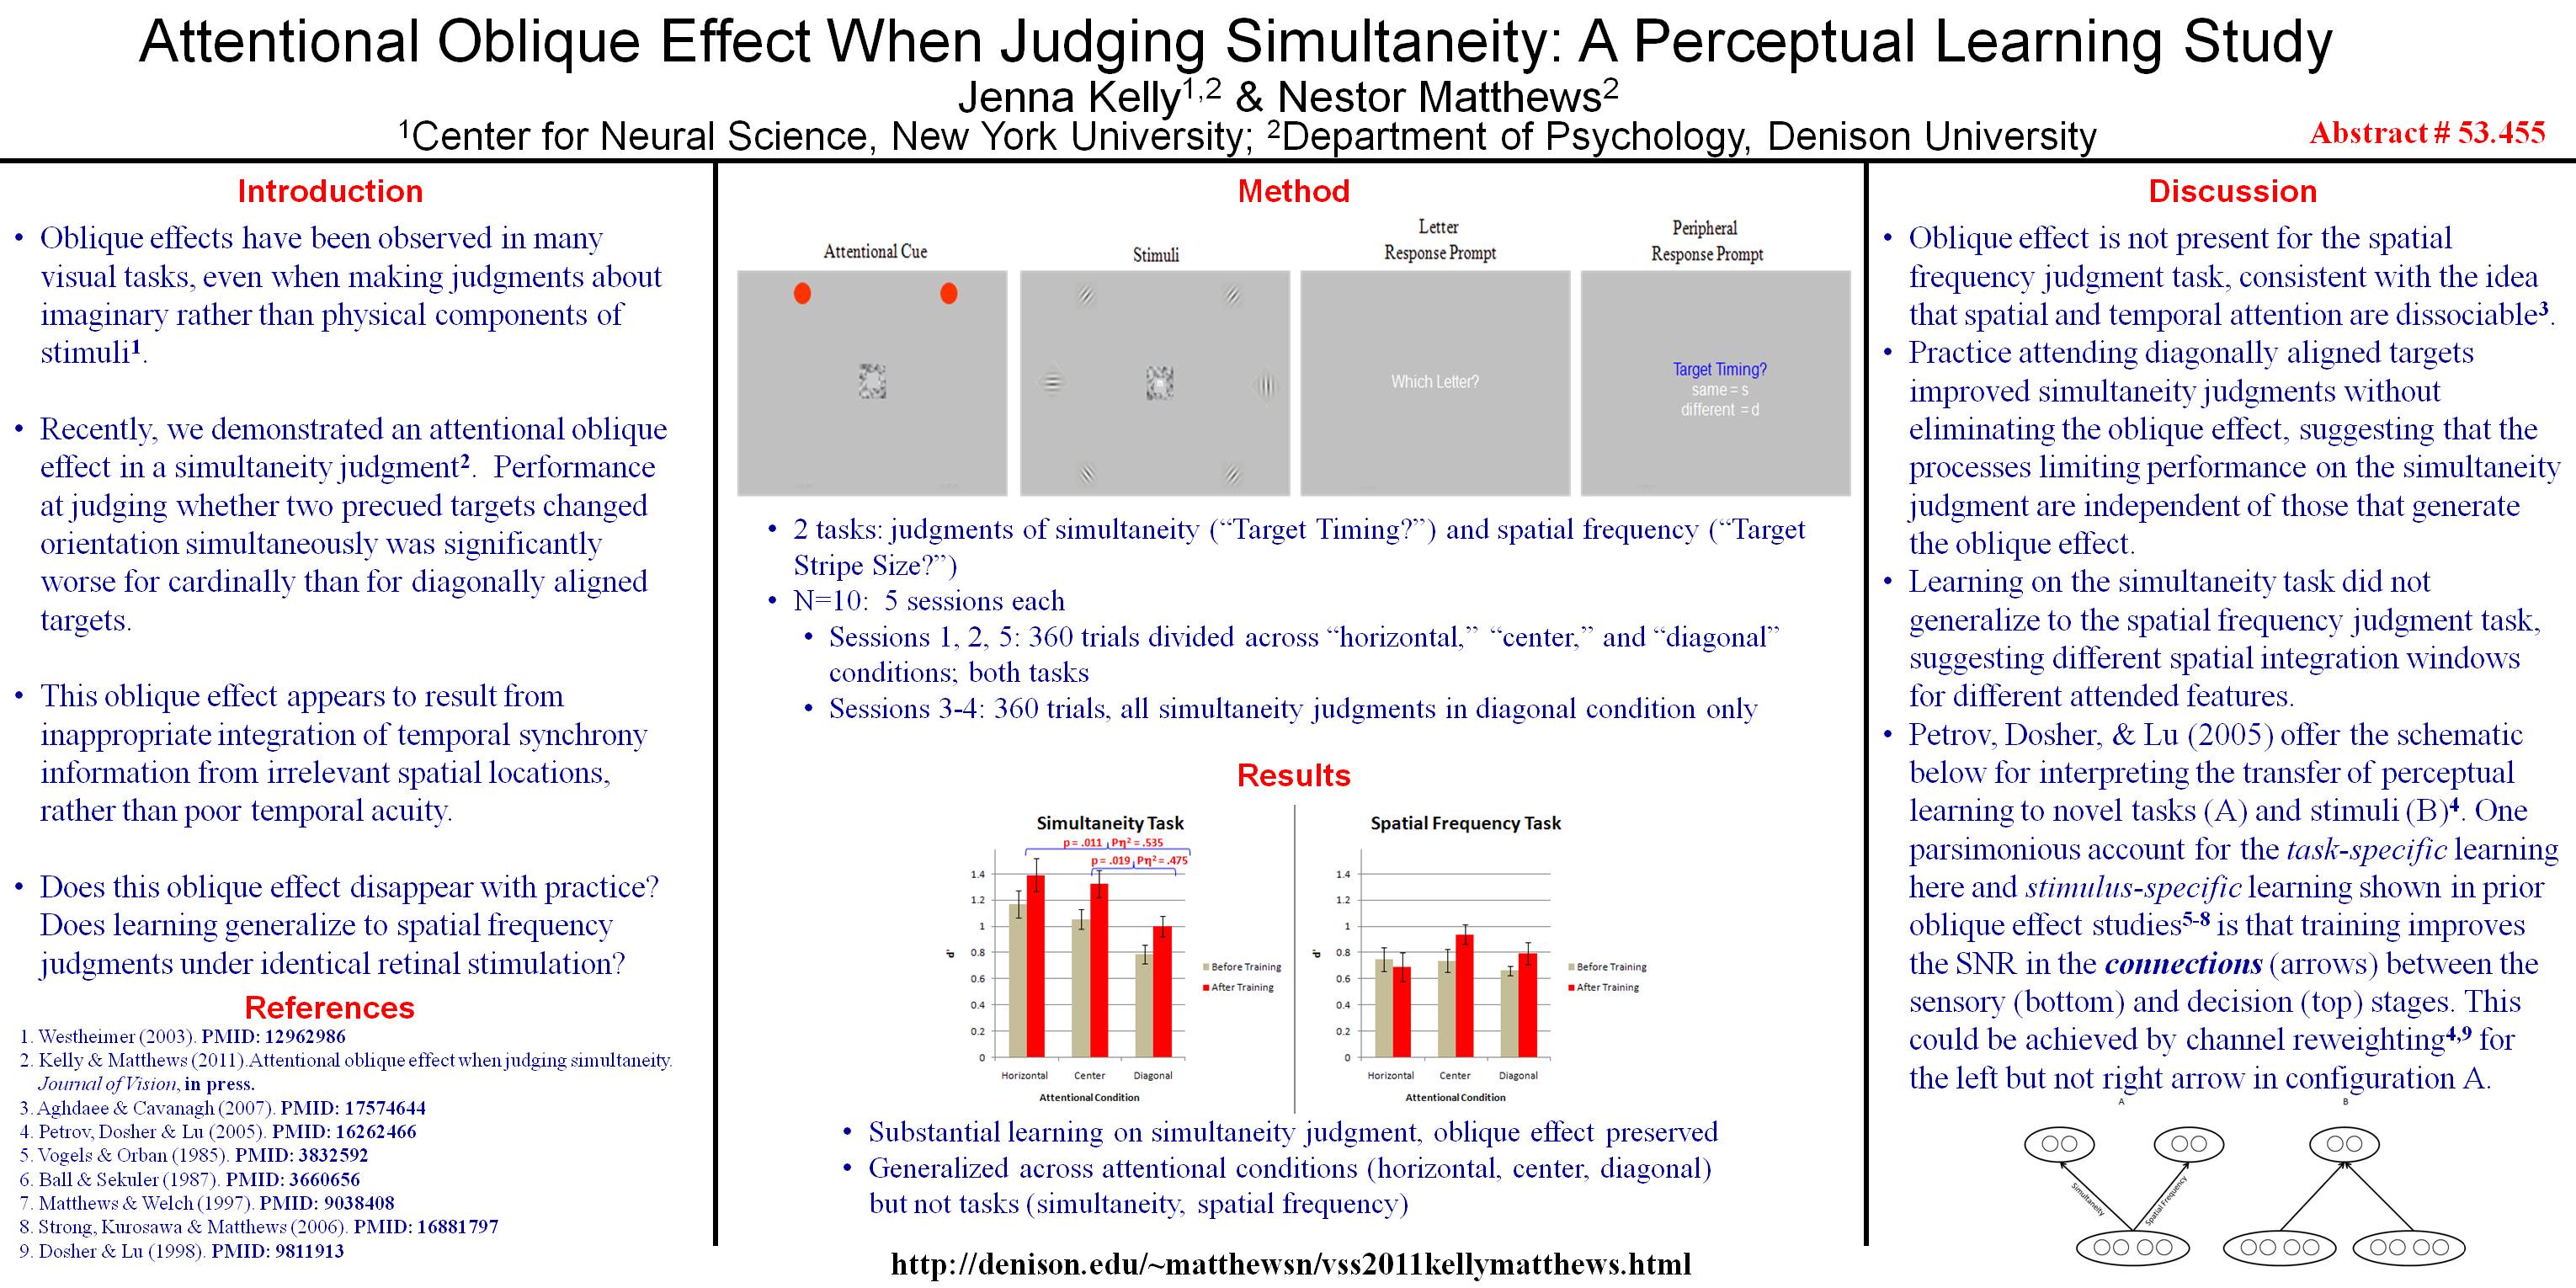 Attentional Oblique Effect When Judging Simultaneity: A Perceptual Learning Study VSS 2011